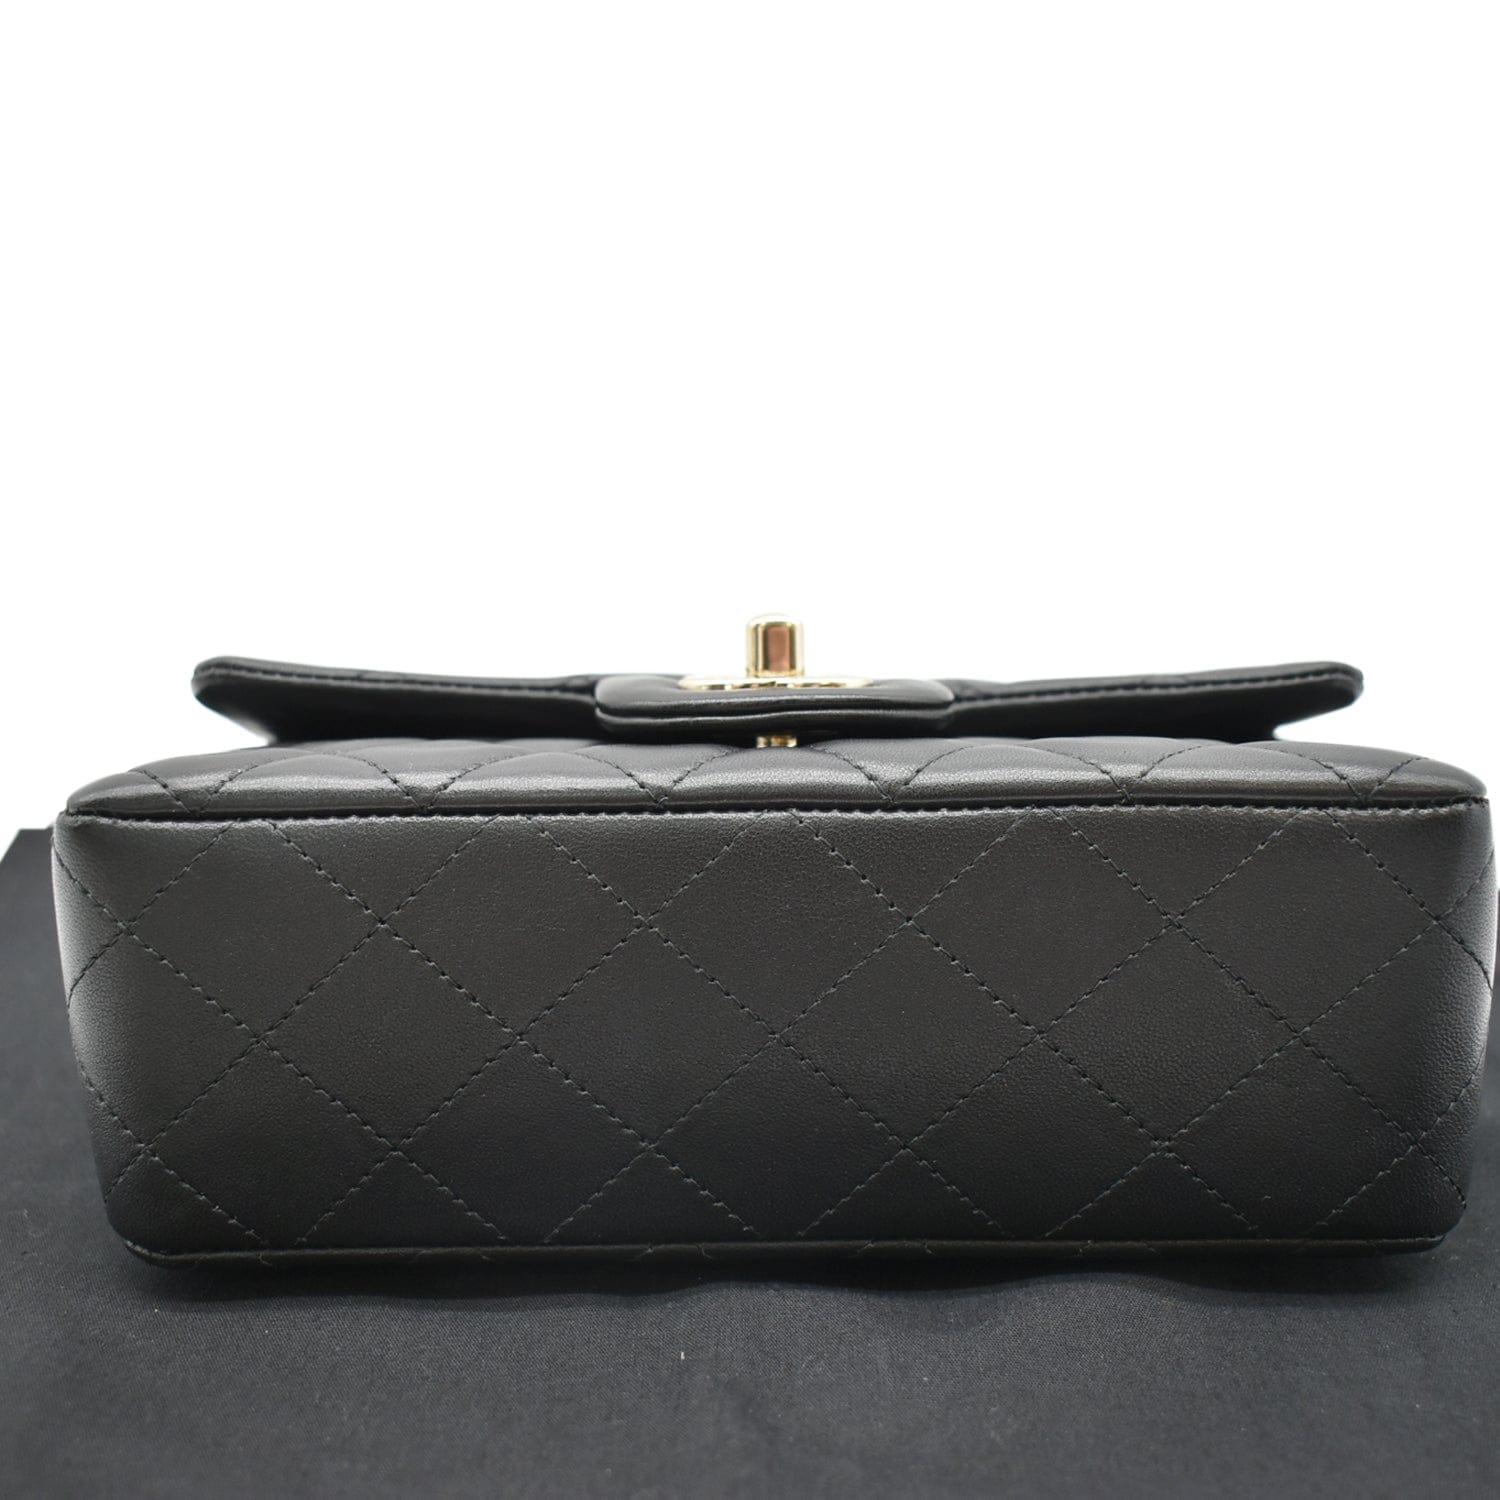 Pu Leather Adjustable Chanel Handbags, For Office, Size: H-11inch W-11inch